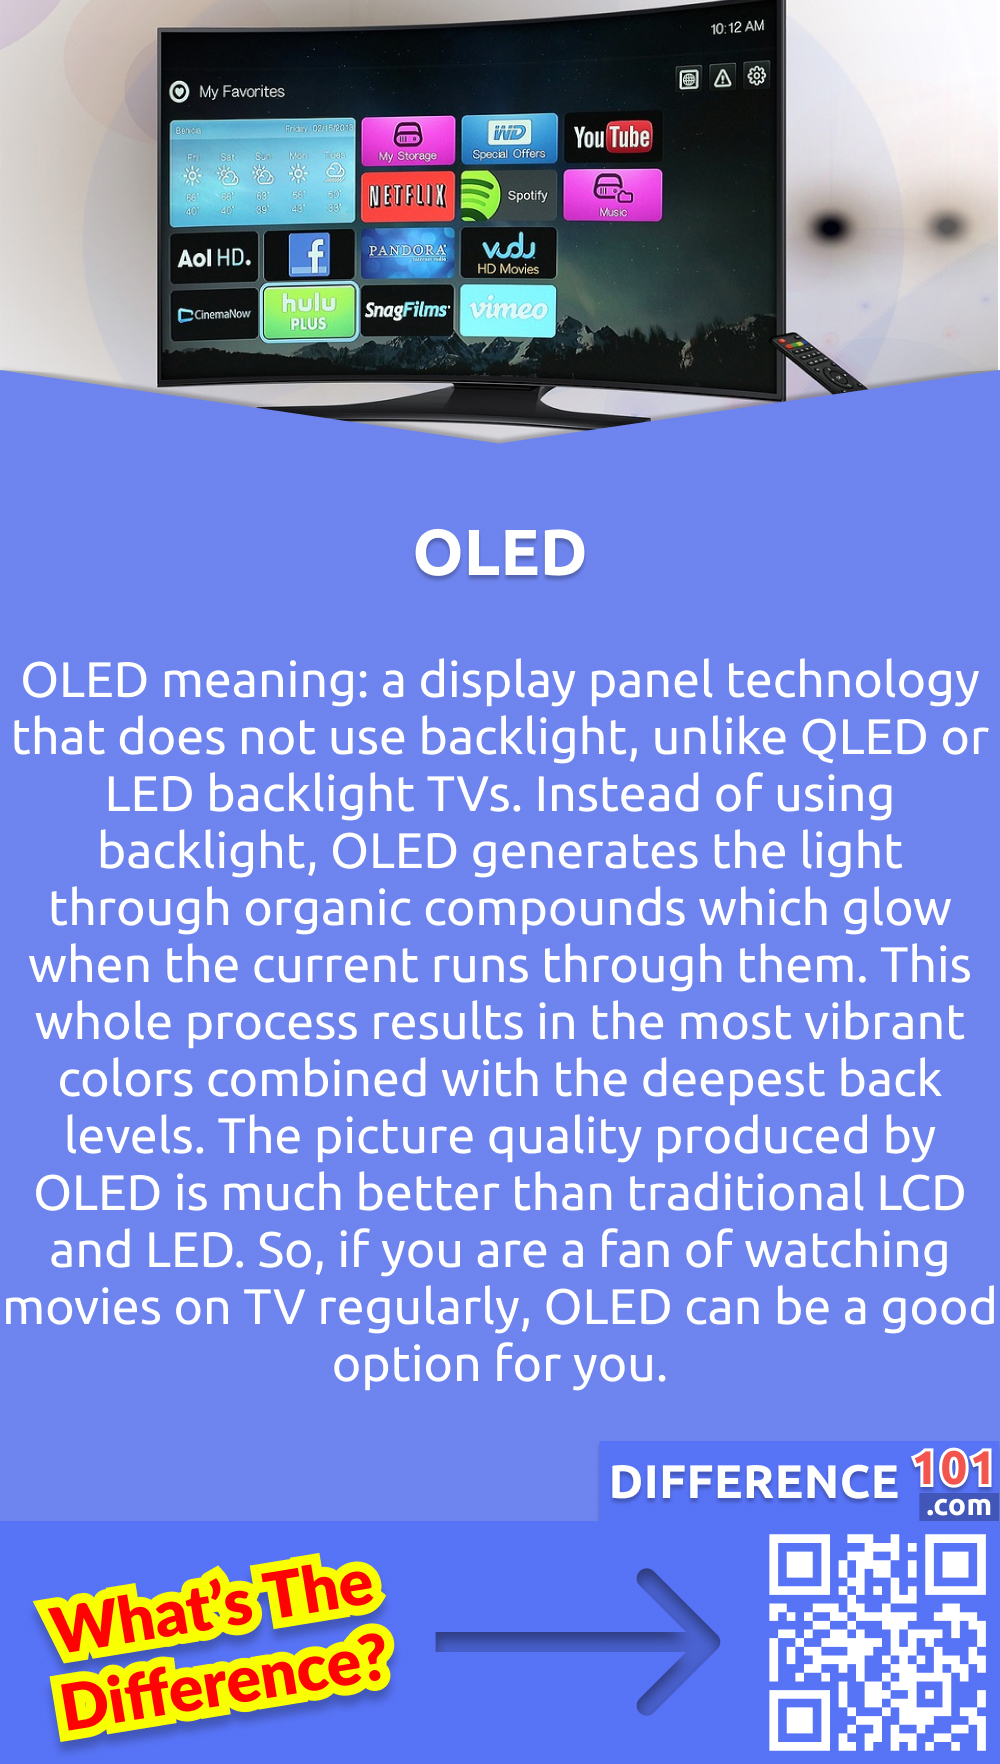  What is OLED? OLED meaning: a display panel technology that does not use backlight, unlike QLED or LED backlight TVs. Instead of using backlight, OLED generates the light through organic compounds which glow when the current runs through them. This whole process results in the most vibrant colors combined with the deepest back levels. The picture quality produced by OLED is much better than traditional LCD and LED. So, if you are a fan of watching movies on TV regularly, OLED can be a good option for you.